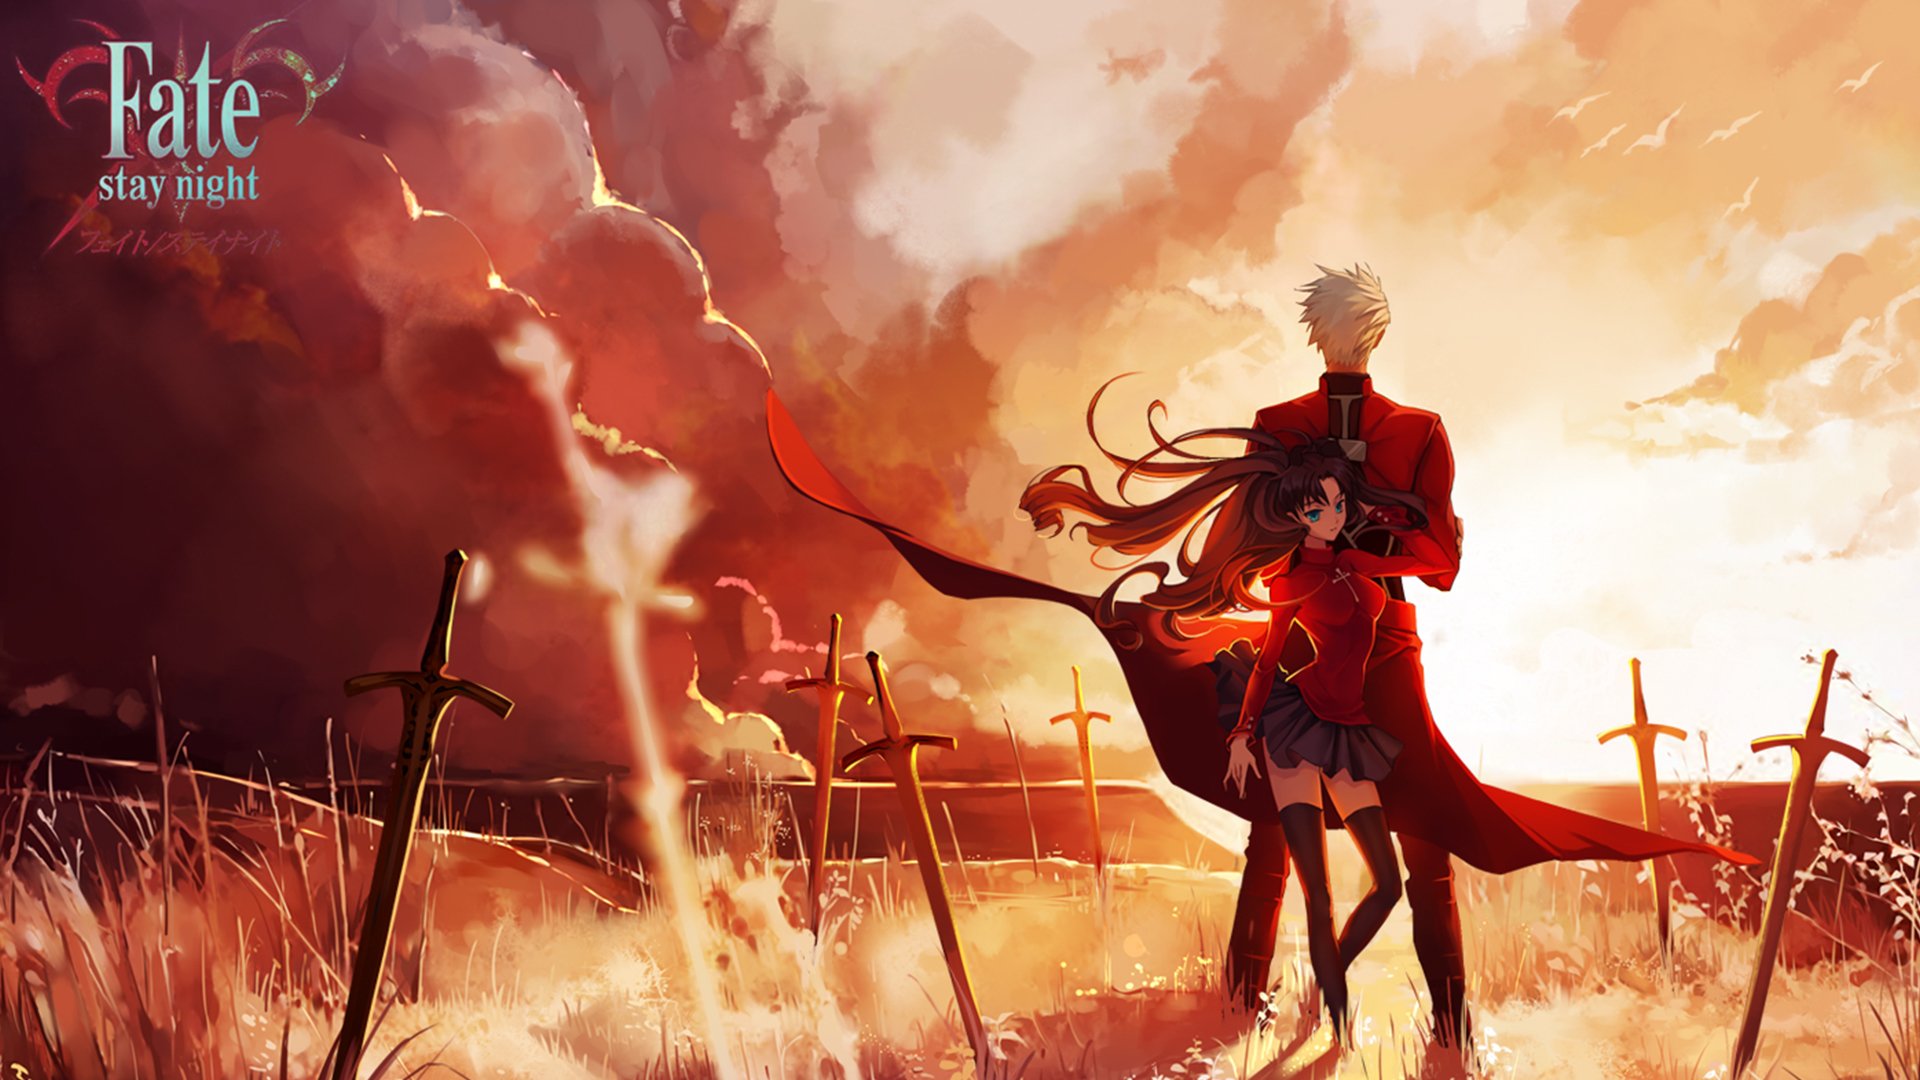 Fate Stay Night Unlimited Blade Works Hd Wallpaper Background Image 19x1080 Id 9585 Wallpaper Abyss